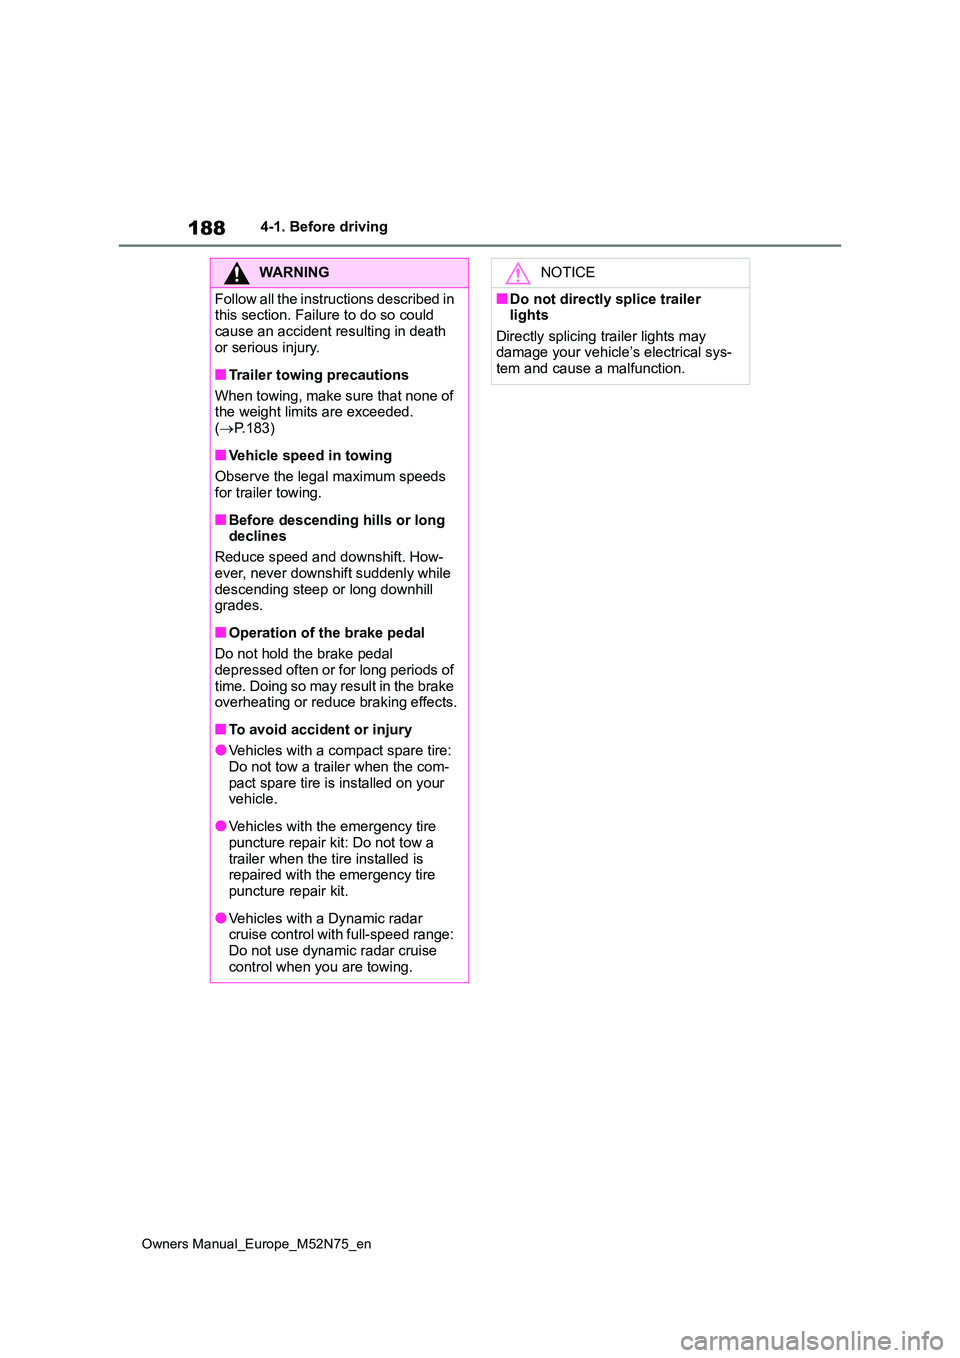 TOYOTA YARIS CROSS 2023  Owners Manual 188
Owners Manual_Europe_M52N75_en
4-1. Before driving
WARNING
Follow all the instructions described in  this section. Failure to do so could  
cause an accident resulting in death  or serious injury.